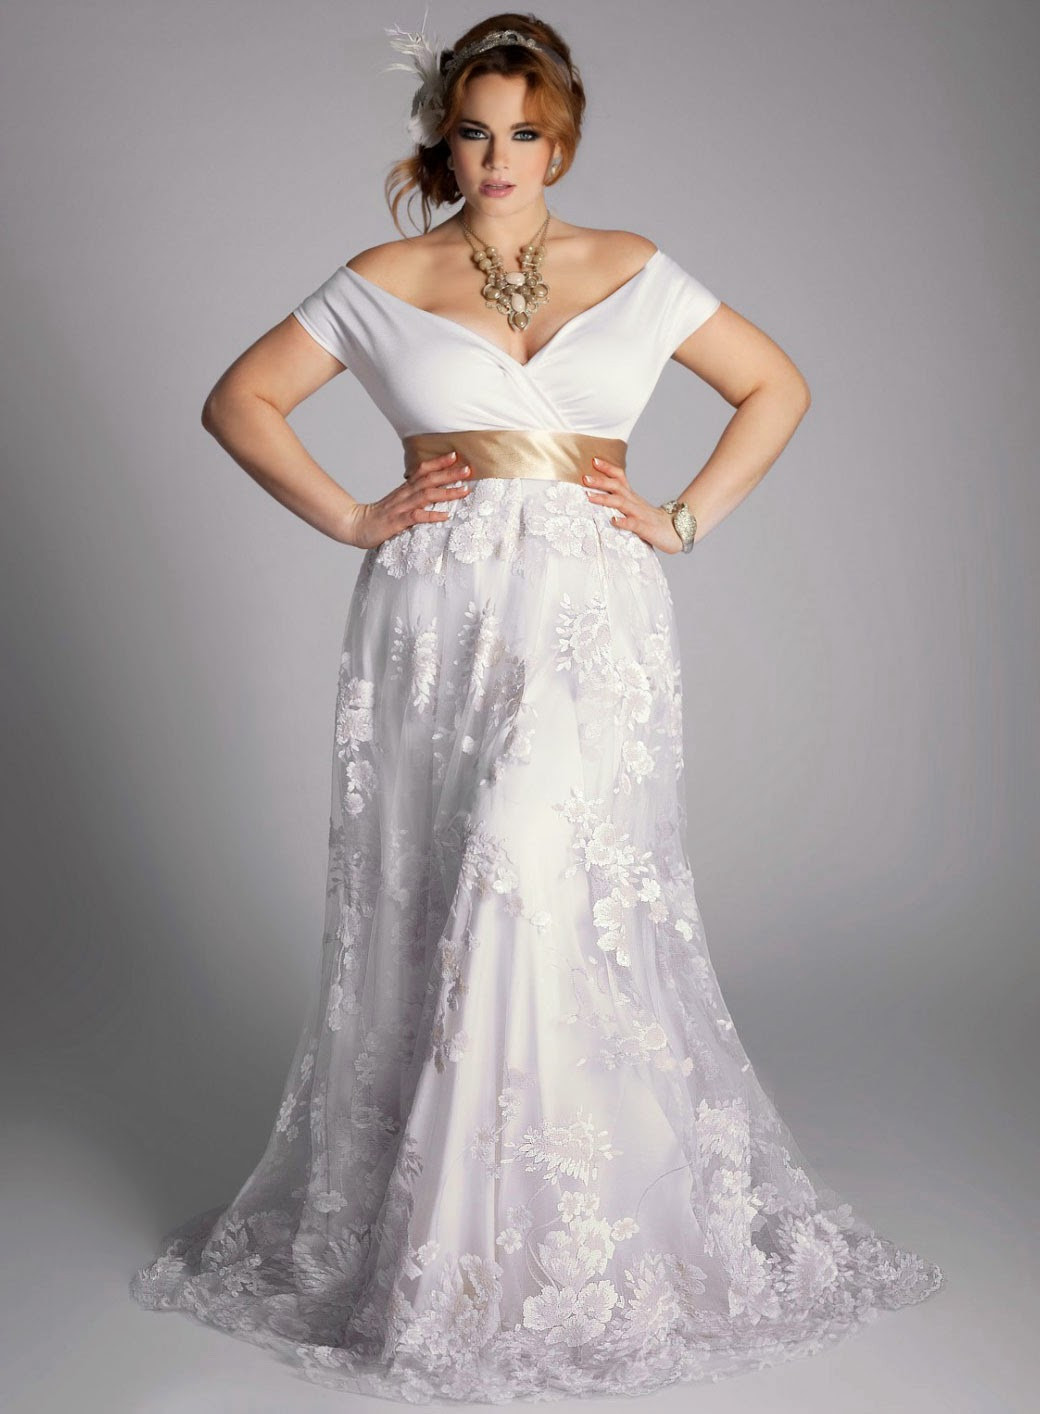 Casual Plus Size Wedding Dresses
 White Casual Plus Size Wedding Dresses Design Ideas